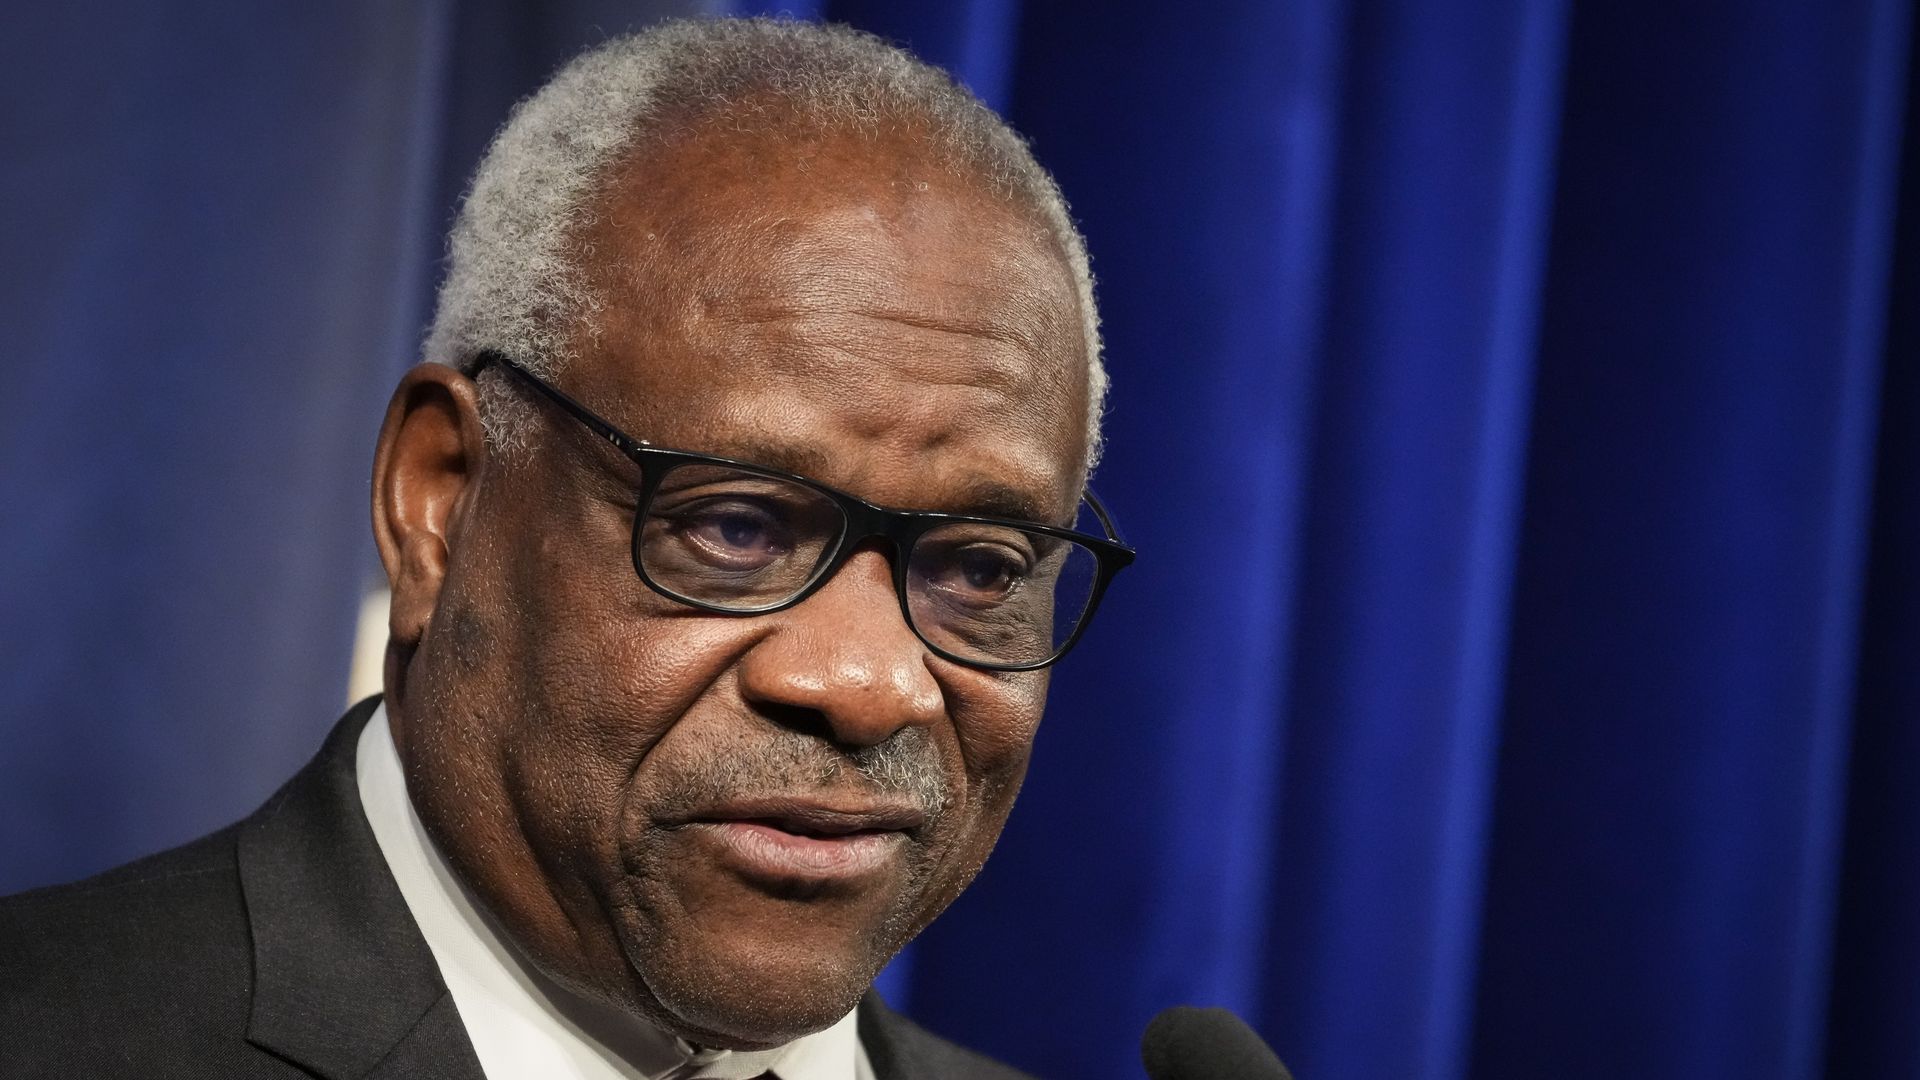 WASHINGTON, DC - OCTOBER 21: Associate Supreme Court Justice Clarence Thomas speaks at the Heritage Foundation on October 21, 2021 in Washington, DC.